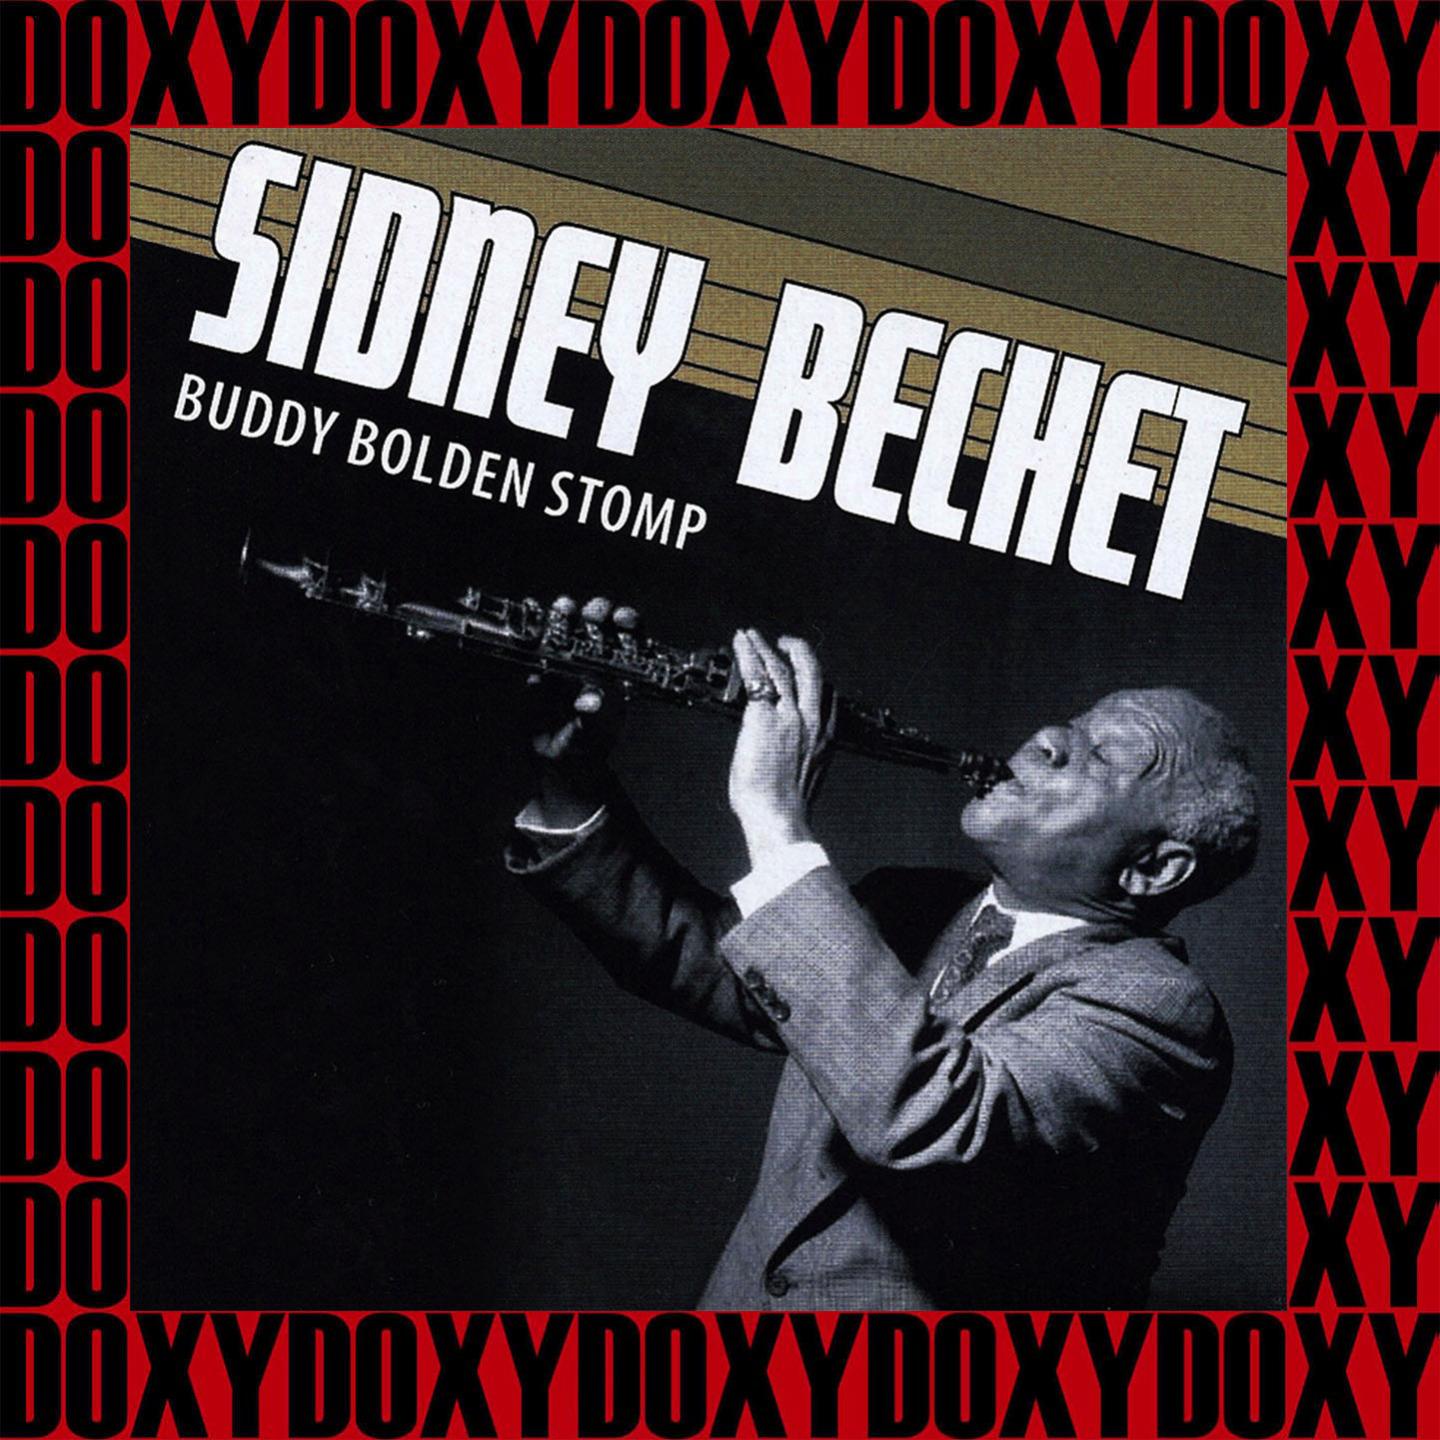 Buddy Bolden Stomp - 1947-1949 (Remastered Version) (Doxy Collection)